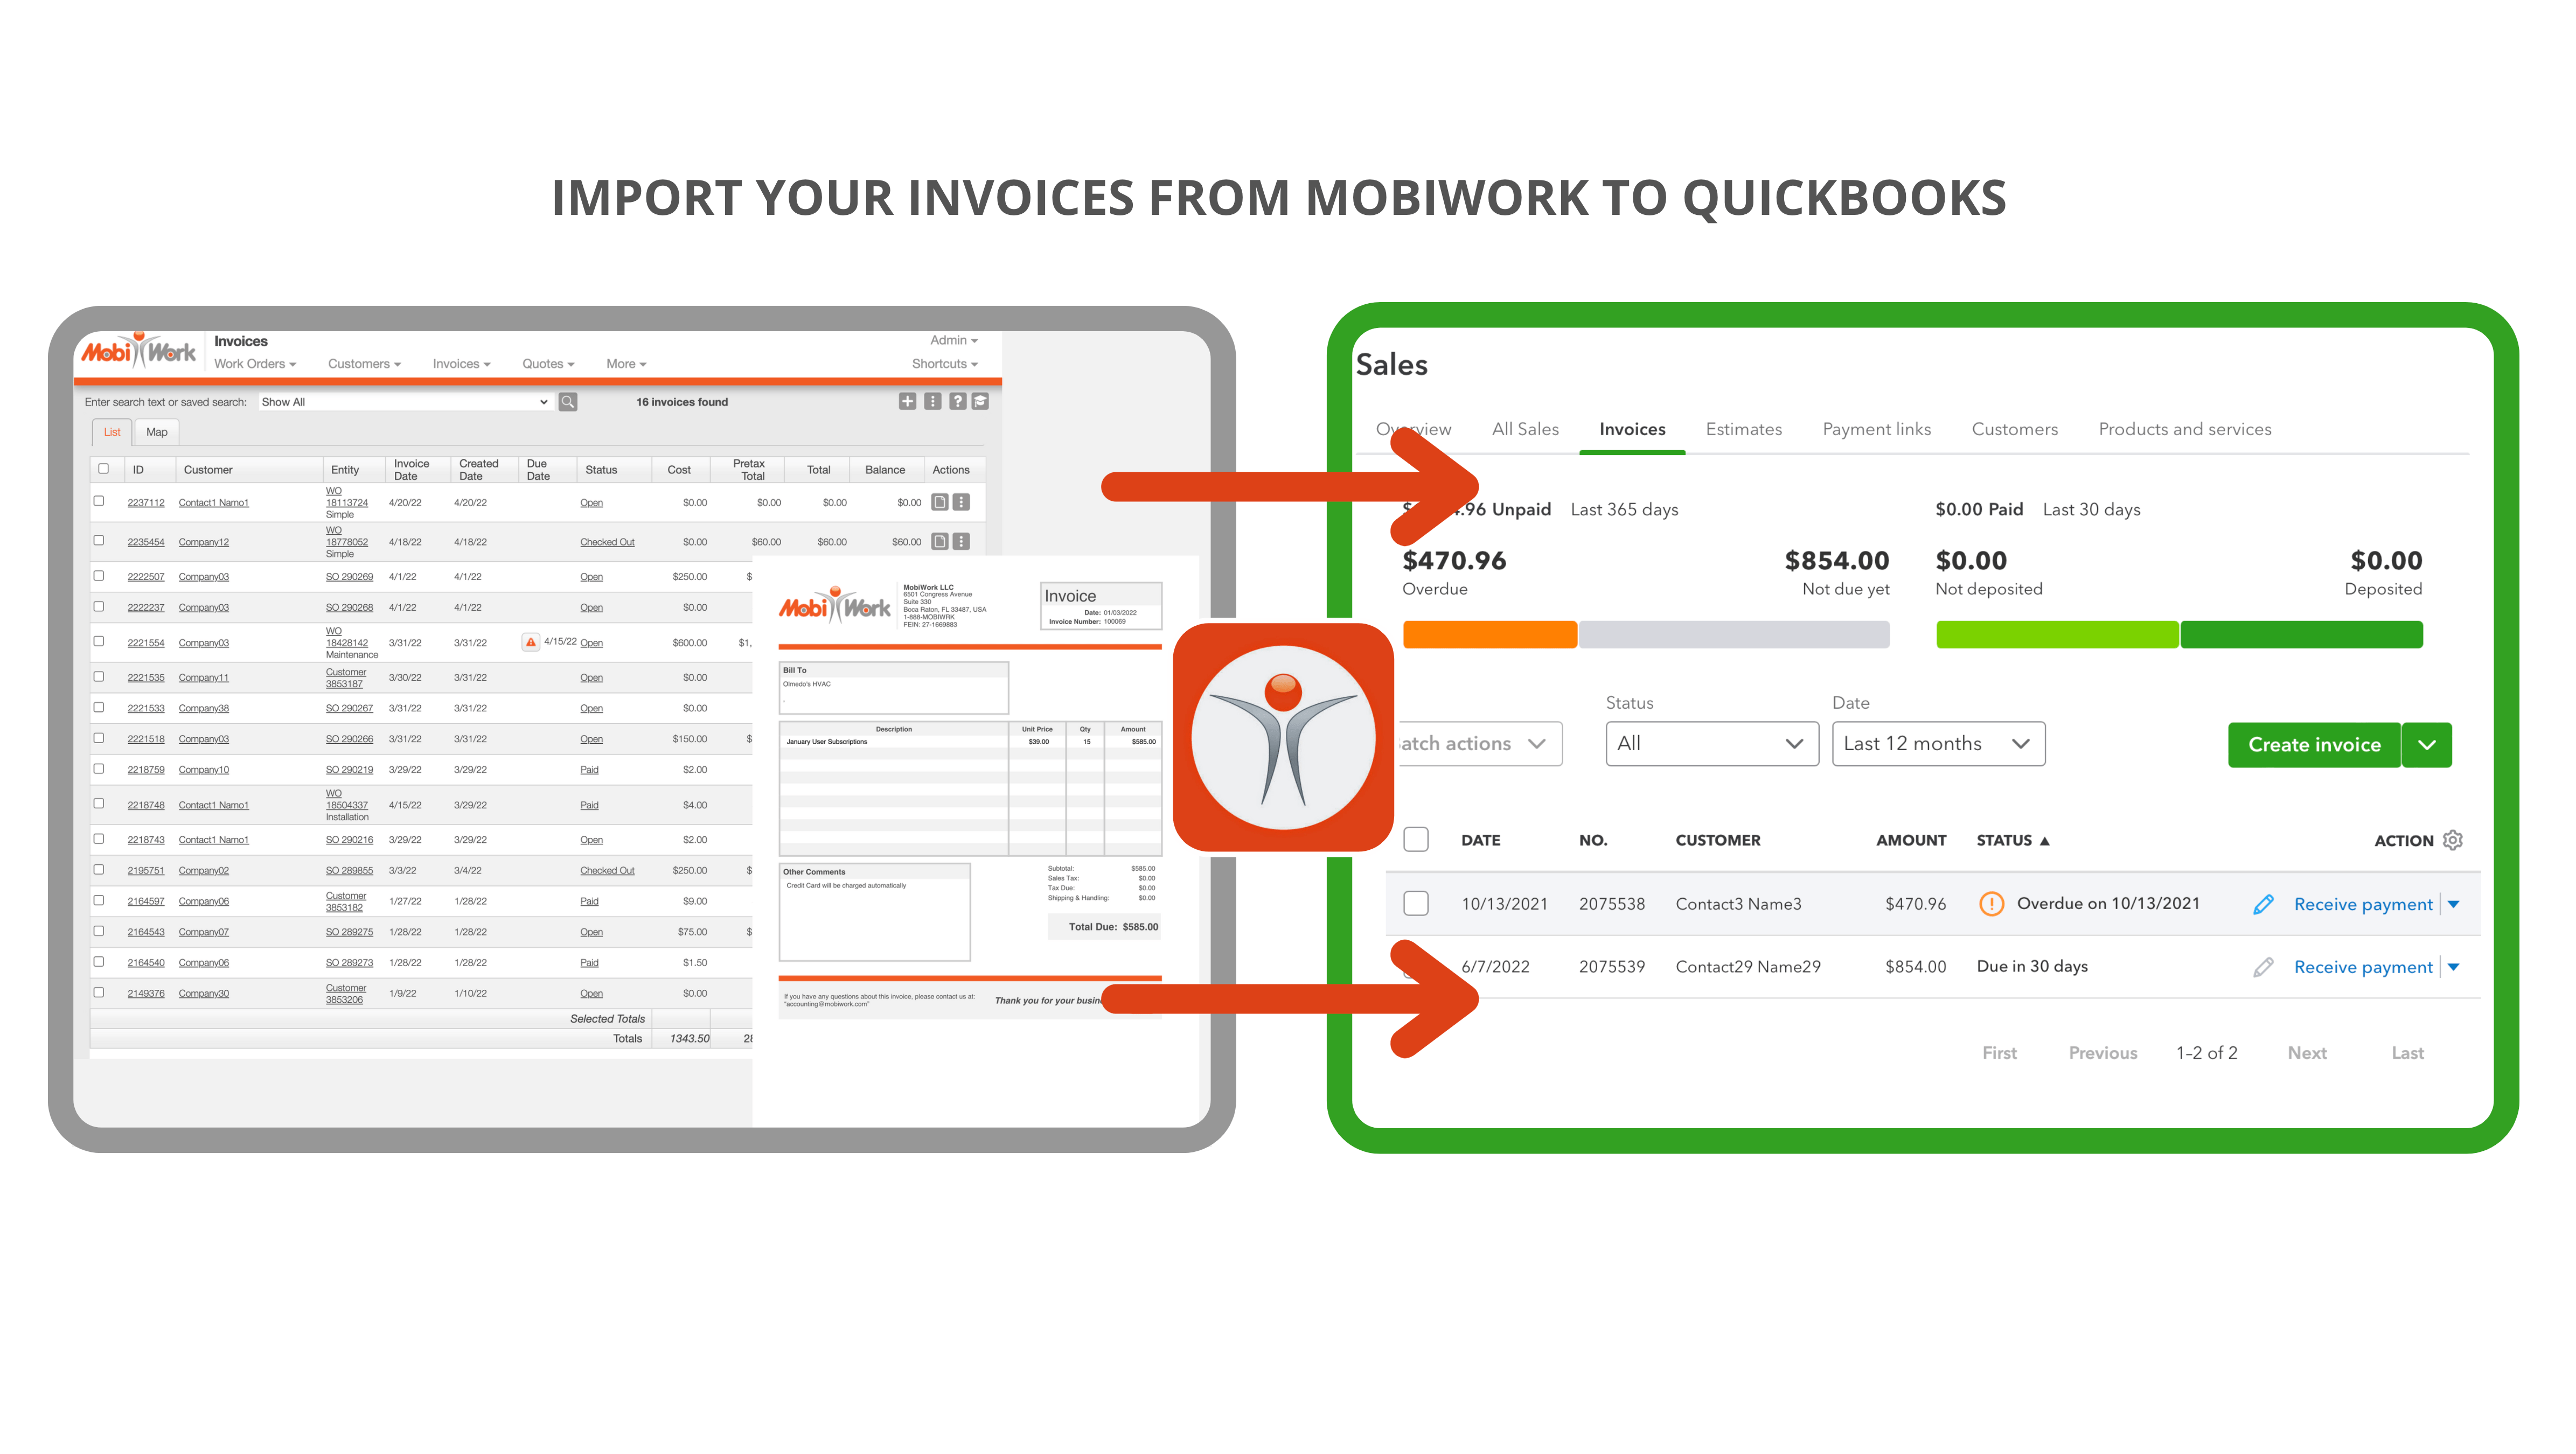 The Advantages of Seamless Two-Way Sync with QuickBooks Online and Telpay.